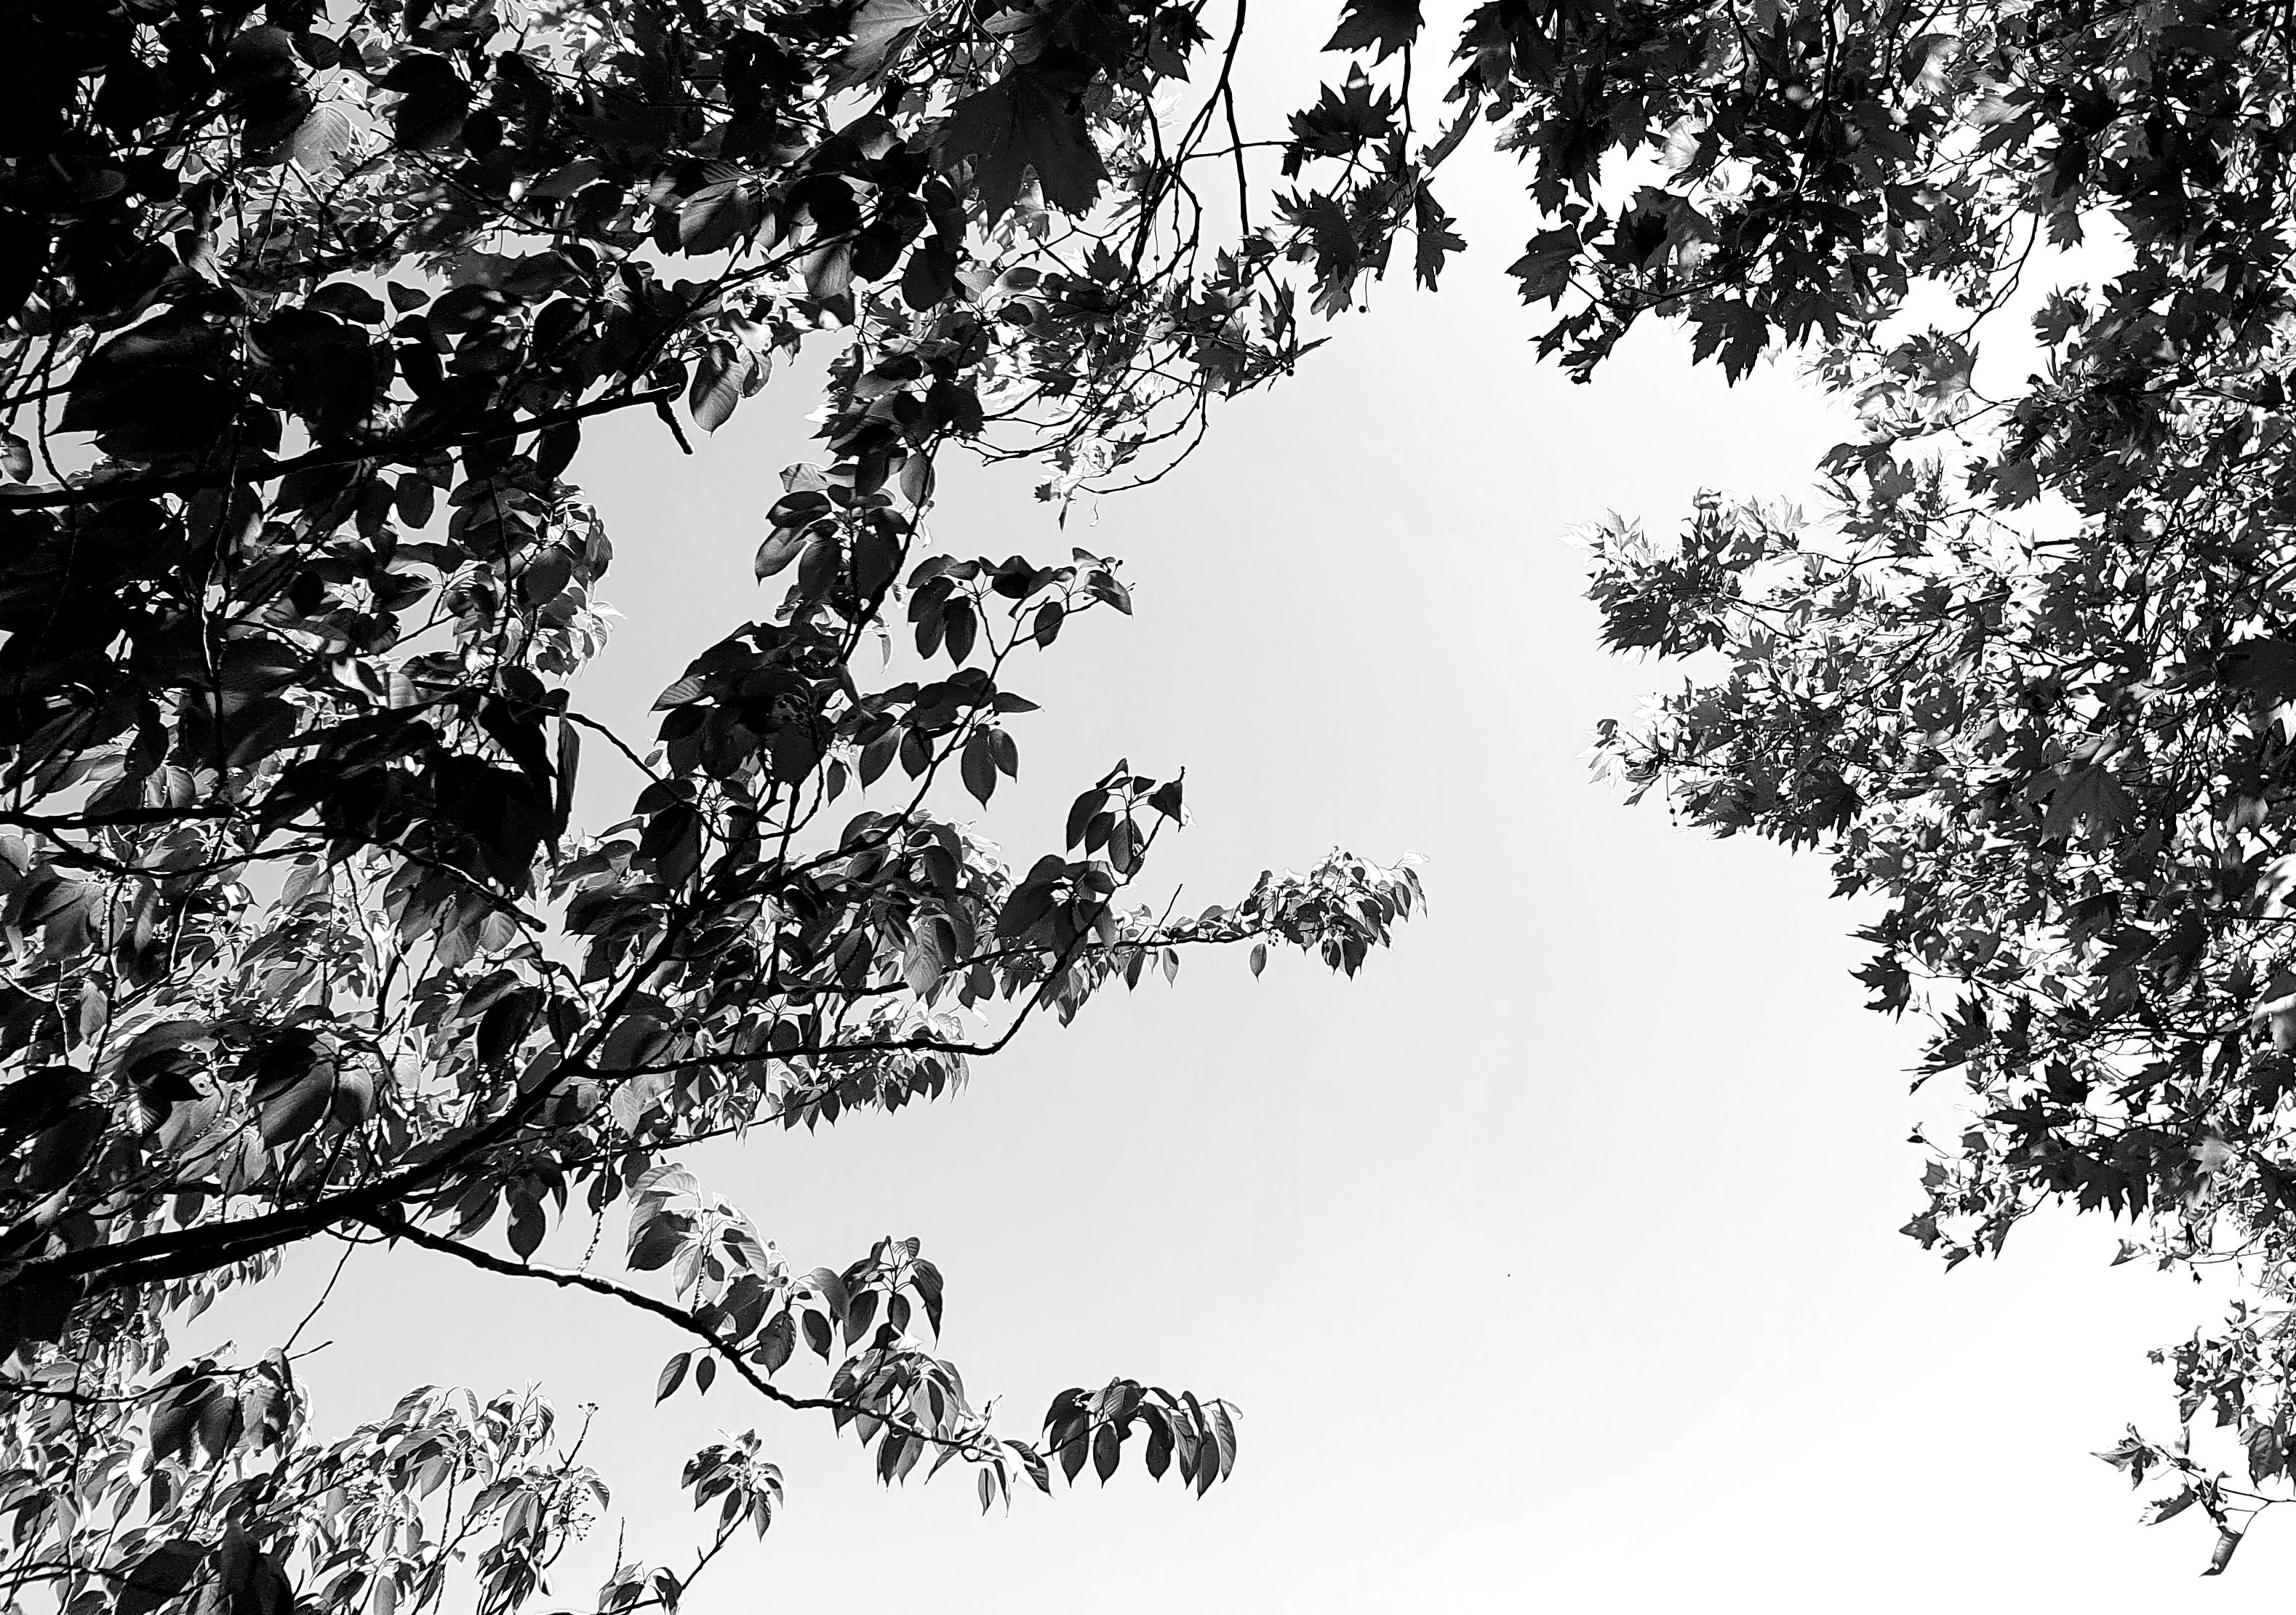 black and white tree/sky image, attempt 2